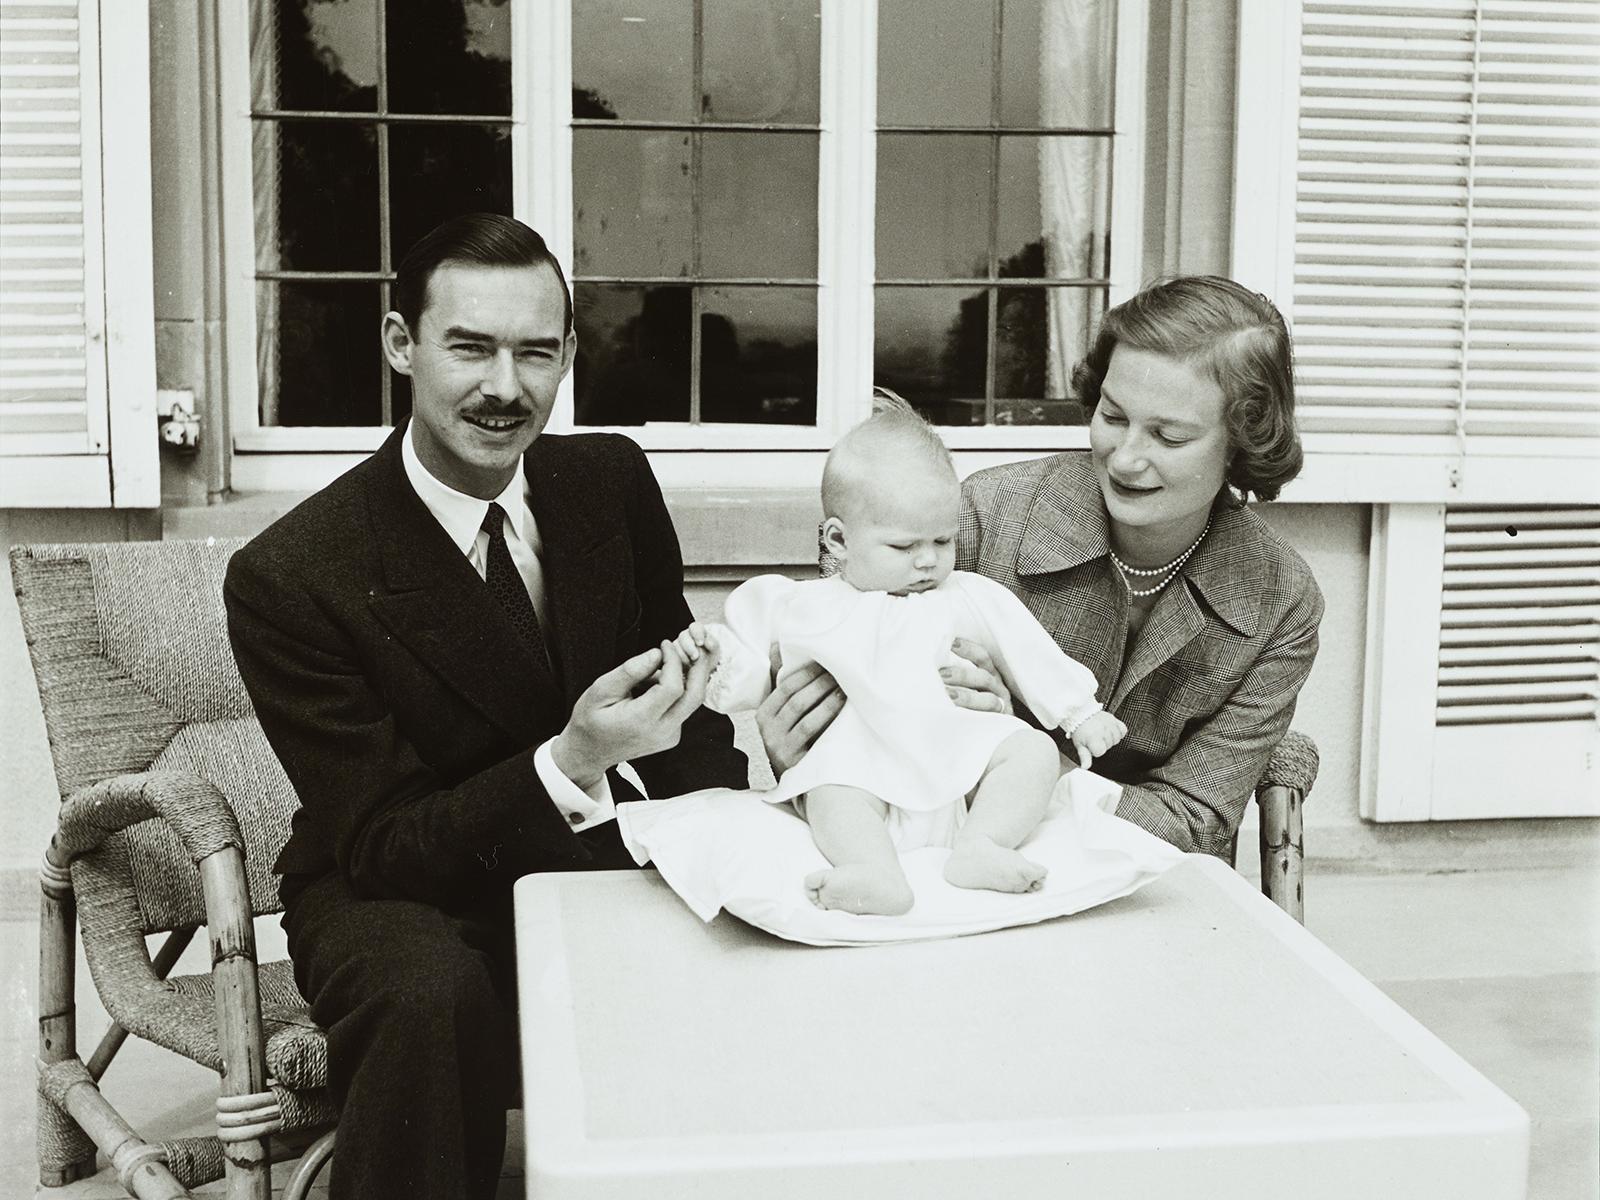 Prince Jean, Princess Joséphine-Charlotte and Princess Marie-Astrid in 1954